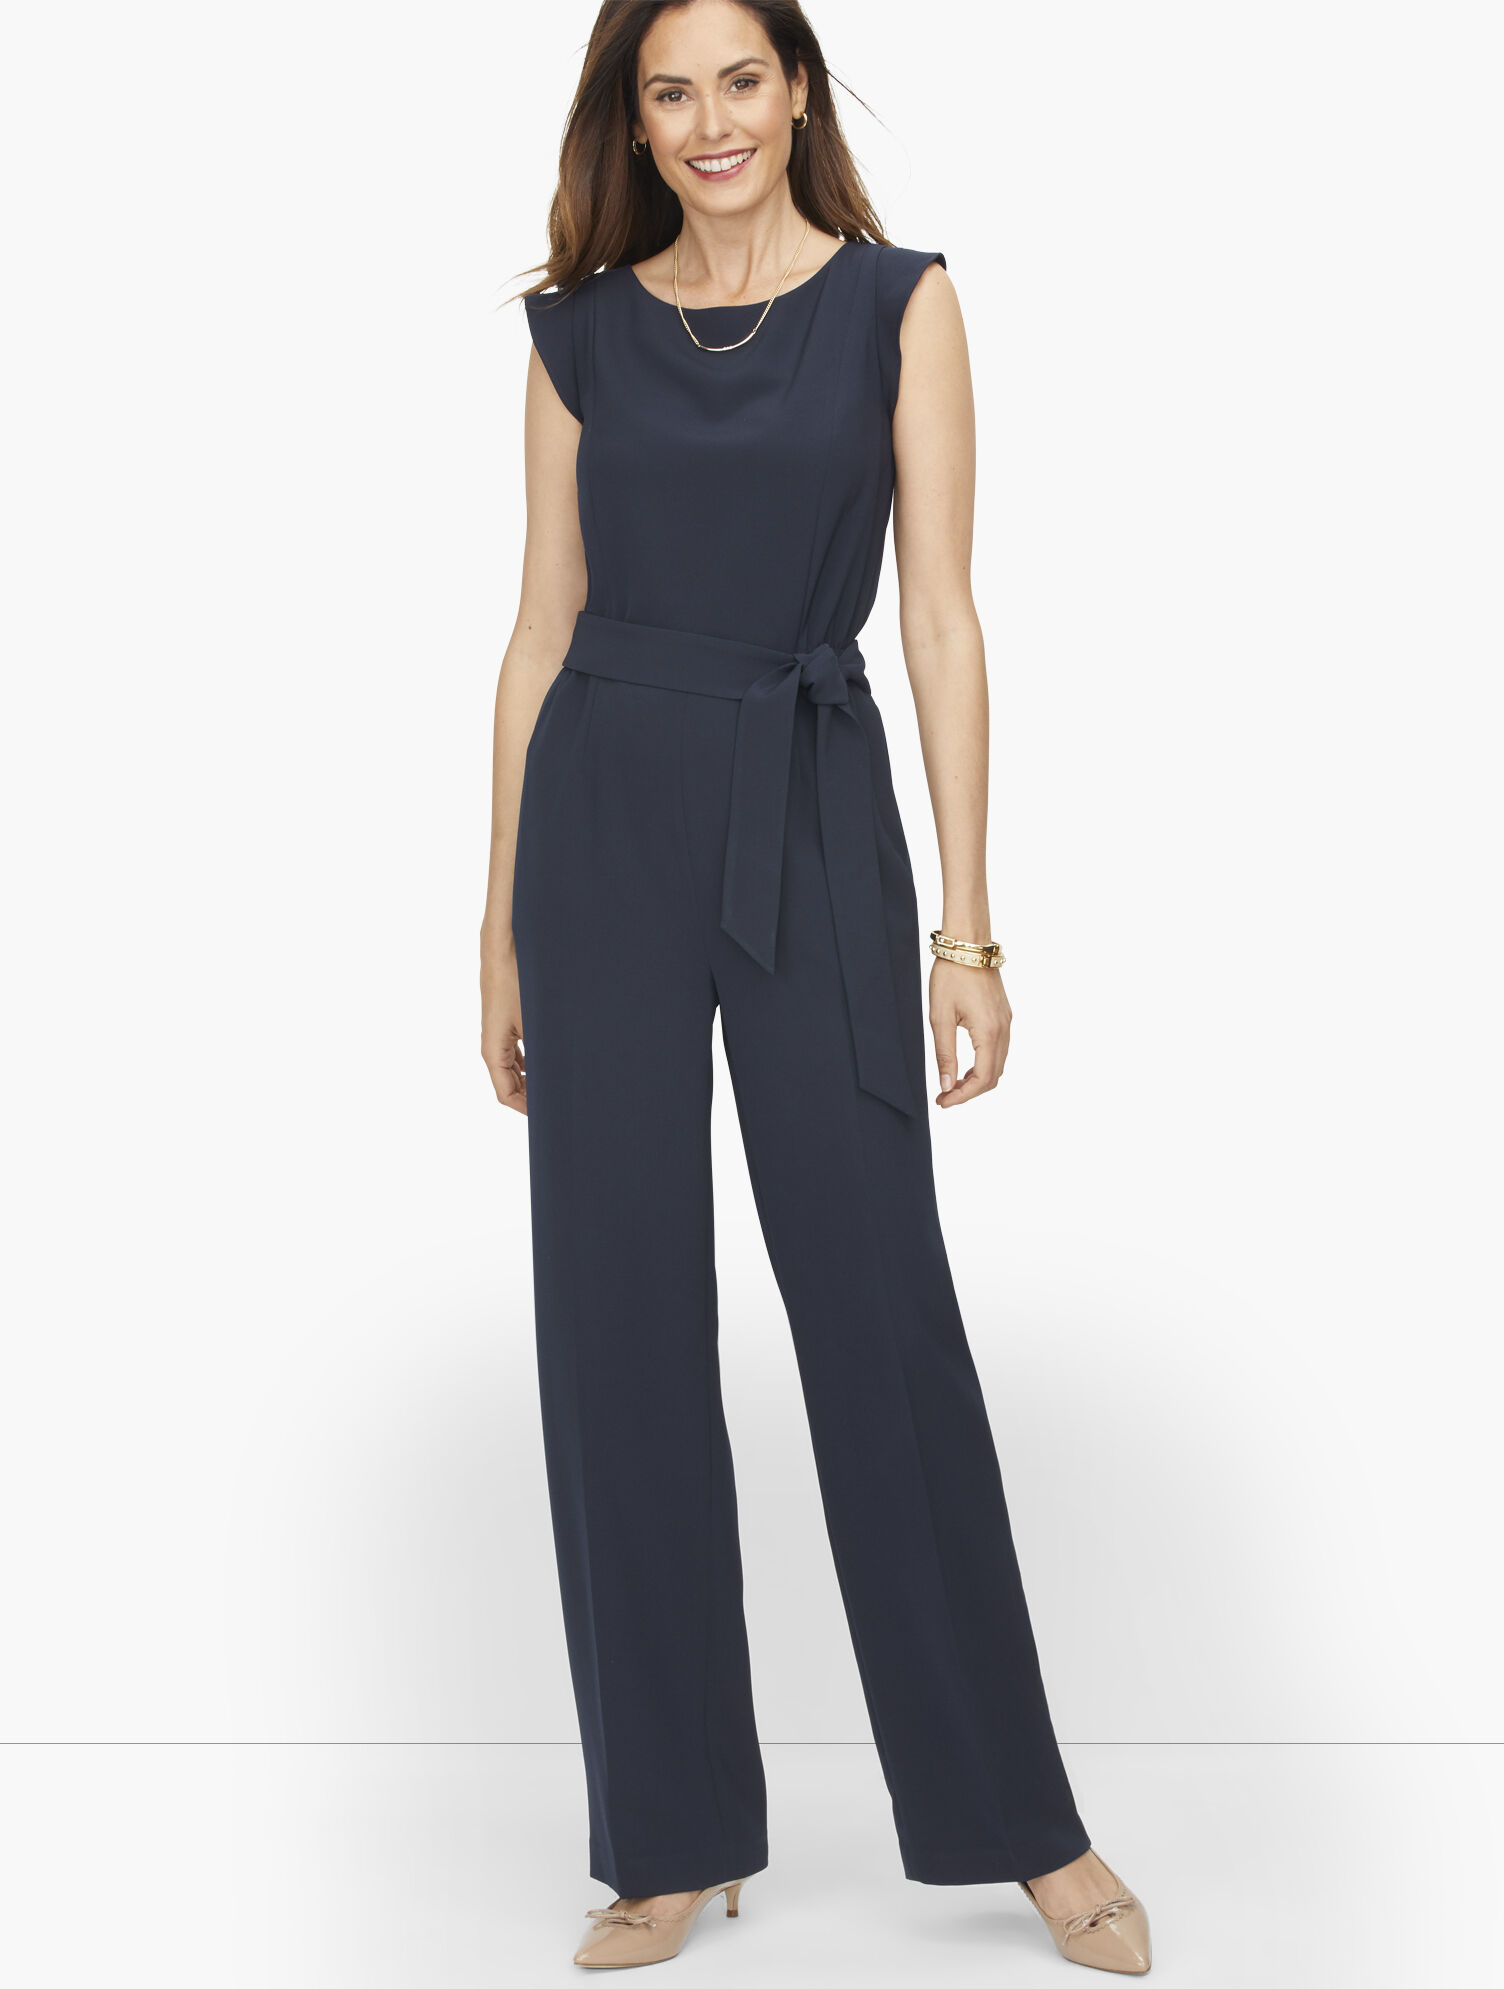 Talbots Ankle & Cropped Pants & Jumpsuits for Women - Poshmark